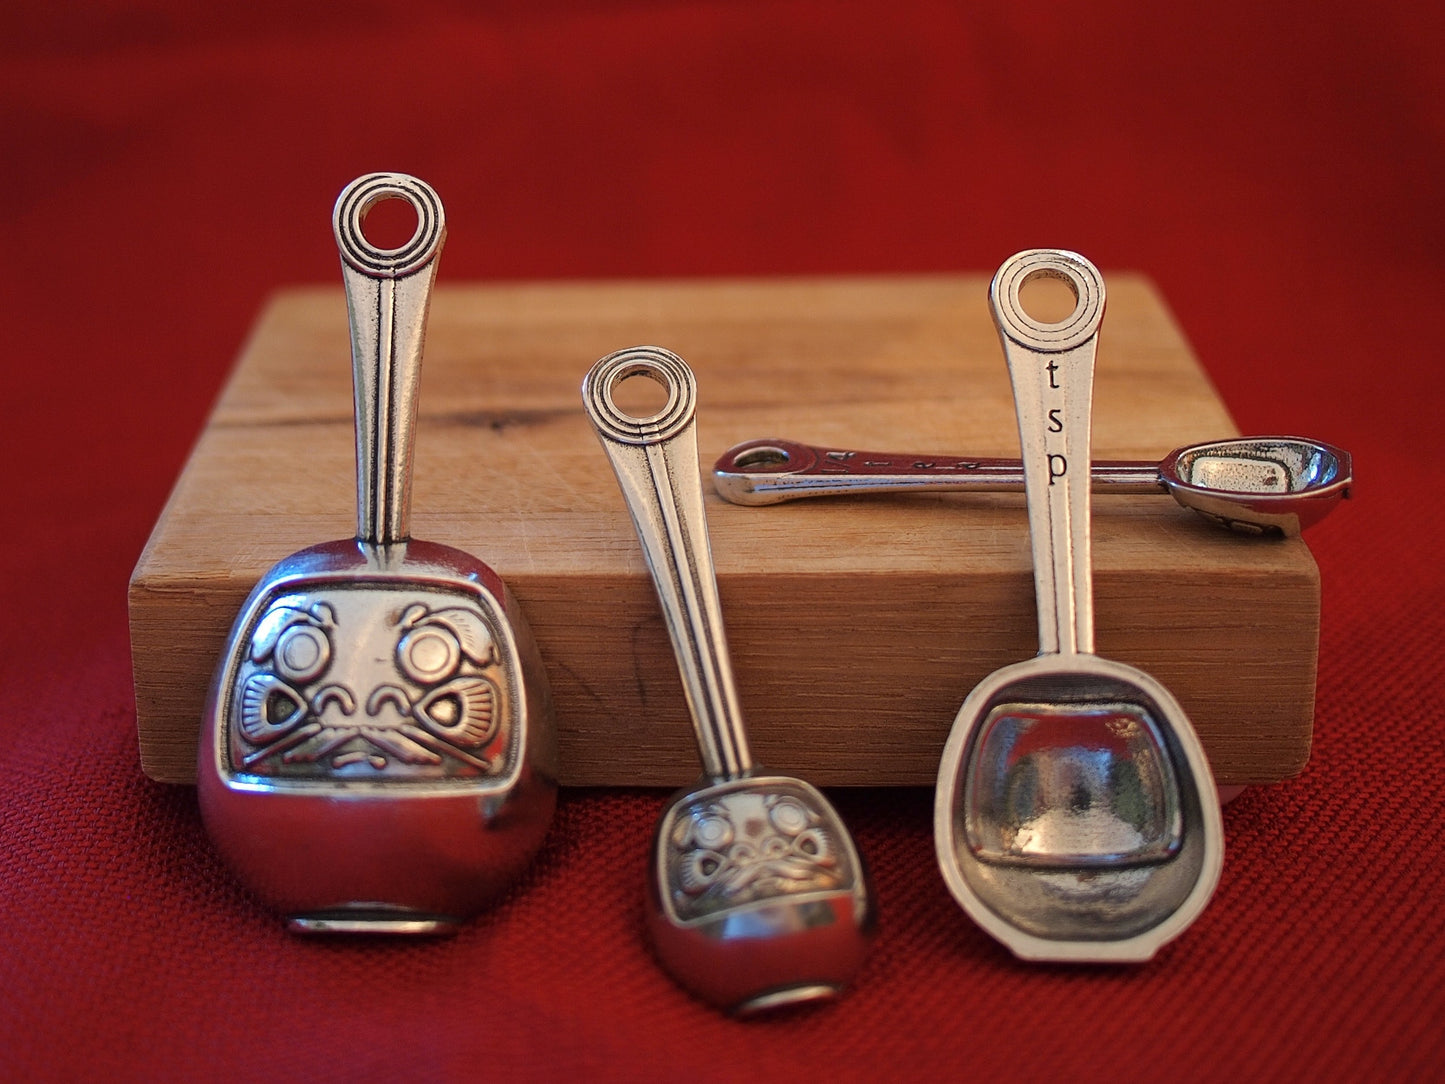 Daruma Measuring Spoons with Display Stand- Dharma Spoons of Luck and Perseverance- Pewter and Copper